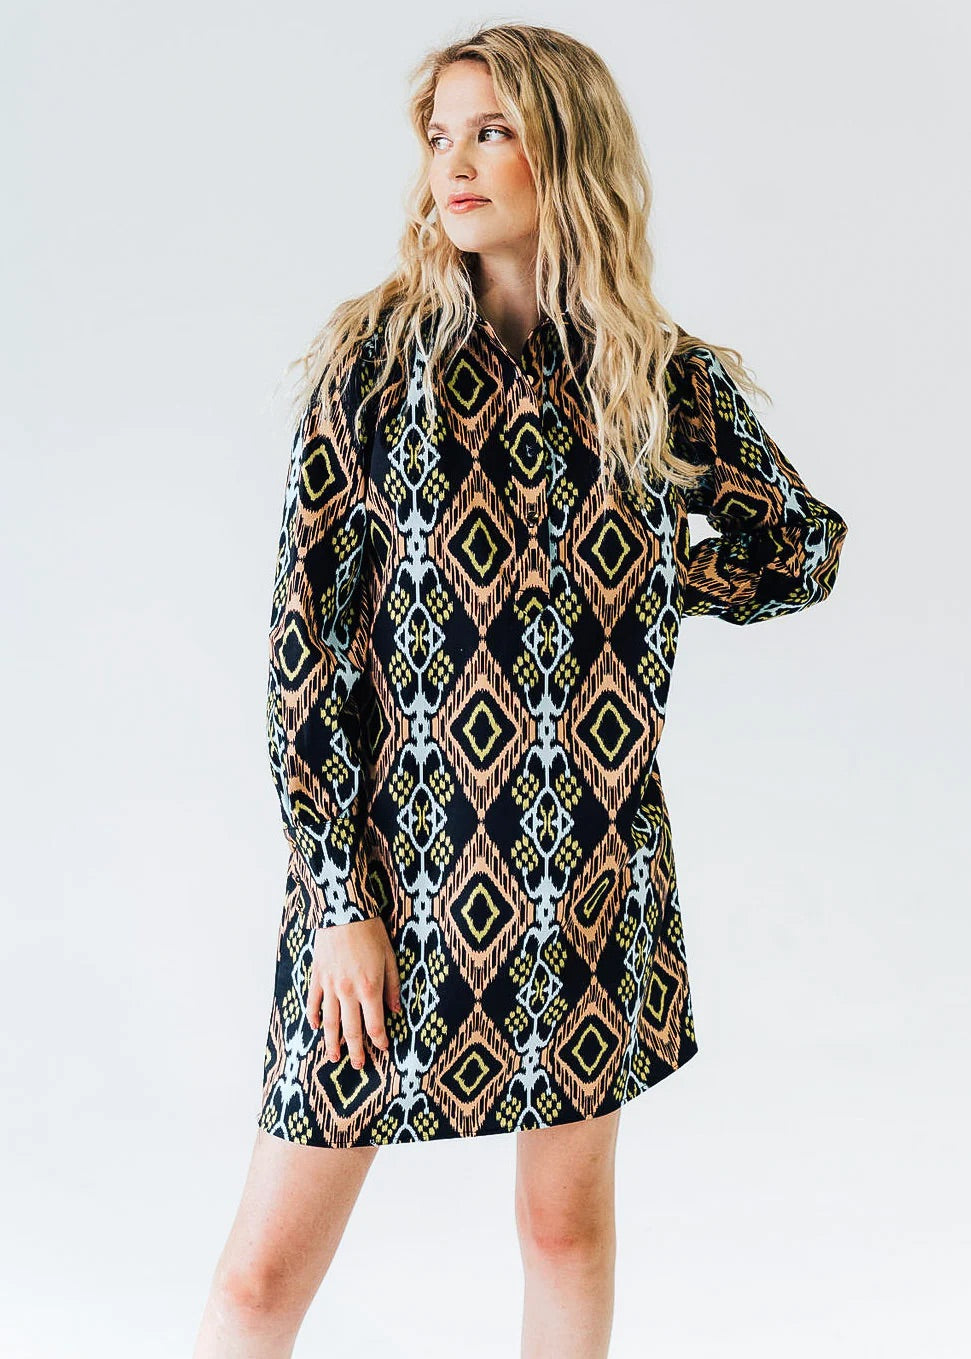 Never A Wallflower Everything L/S Dress in Ikat Cotton Spandex